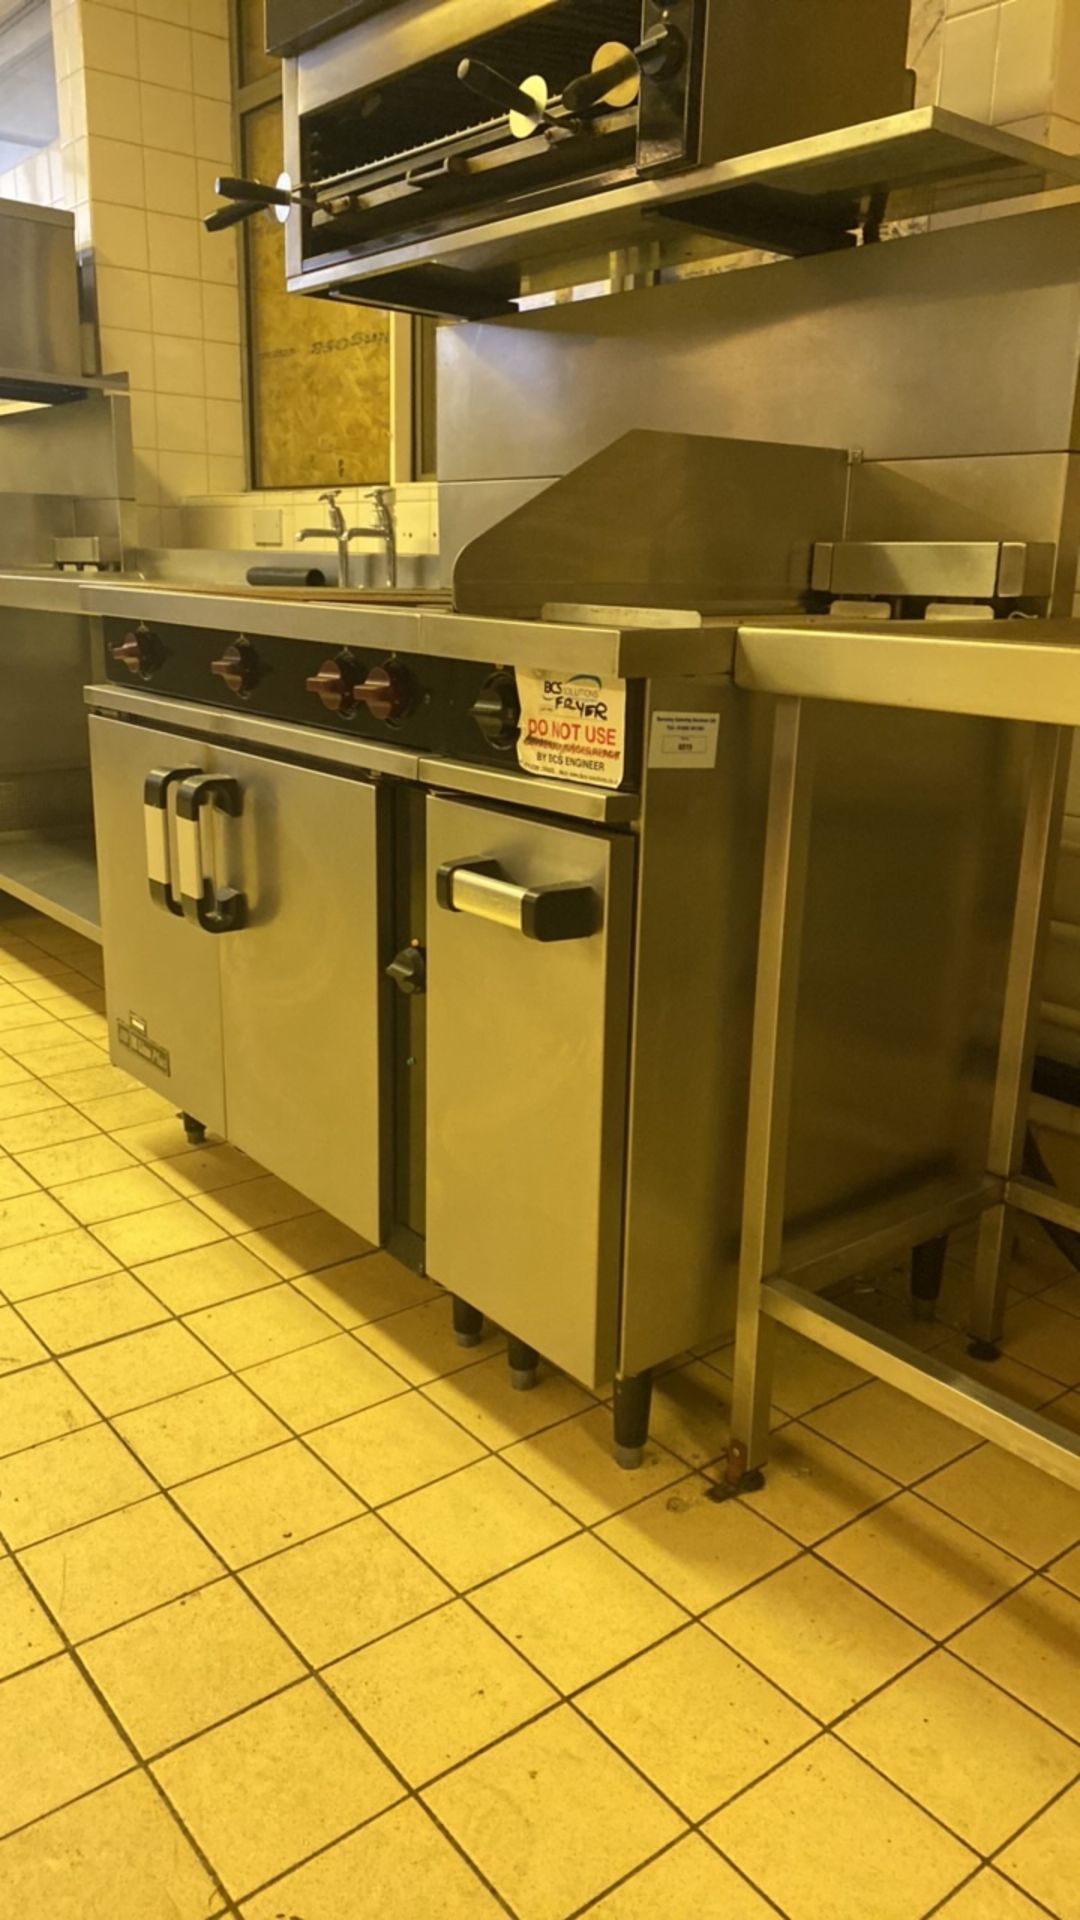 Morewood M Line Plus Solid Top Oven with Fryer - Image 6 of 6